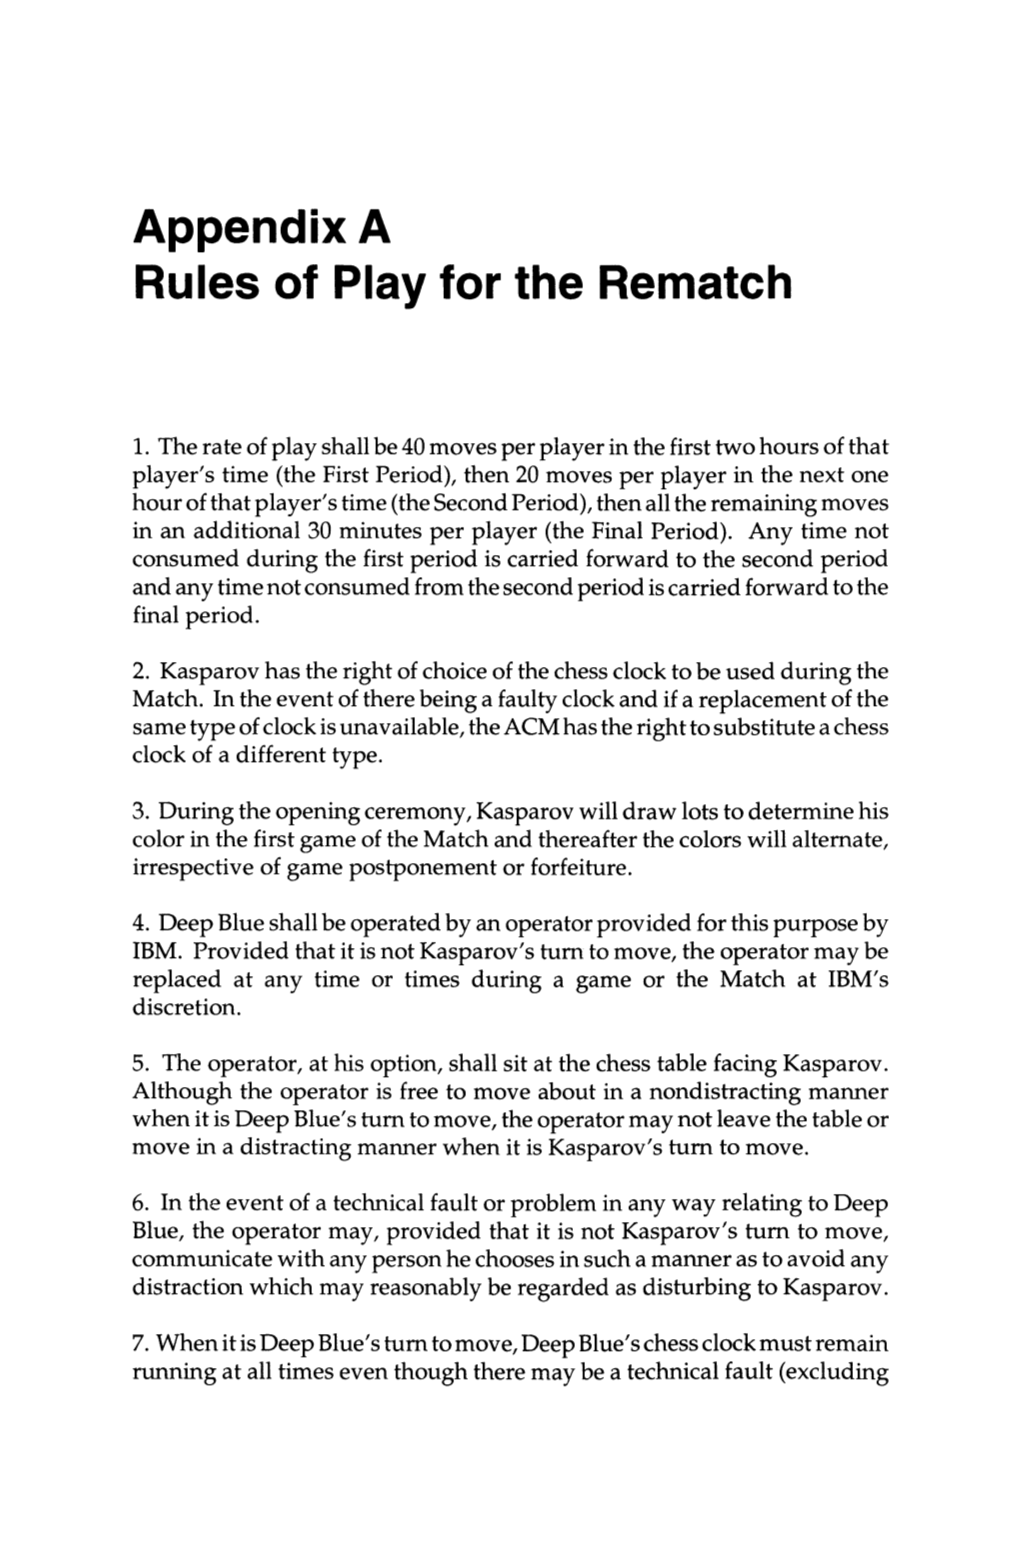 Appendix a Rules of Play for the Rematch